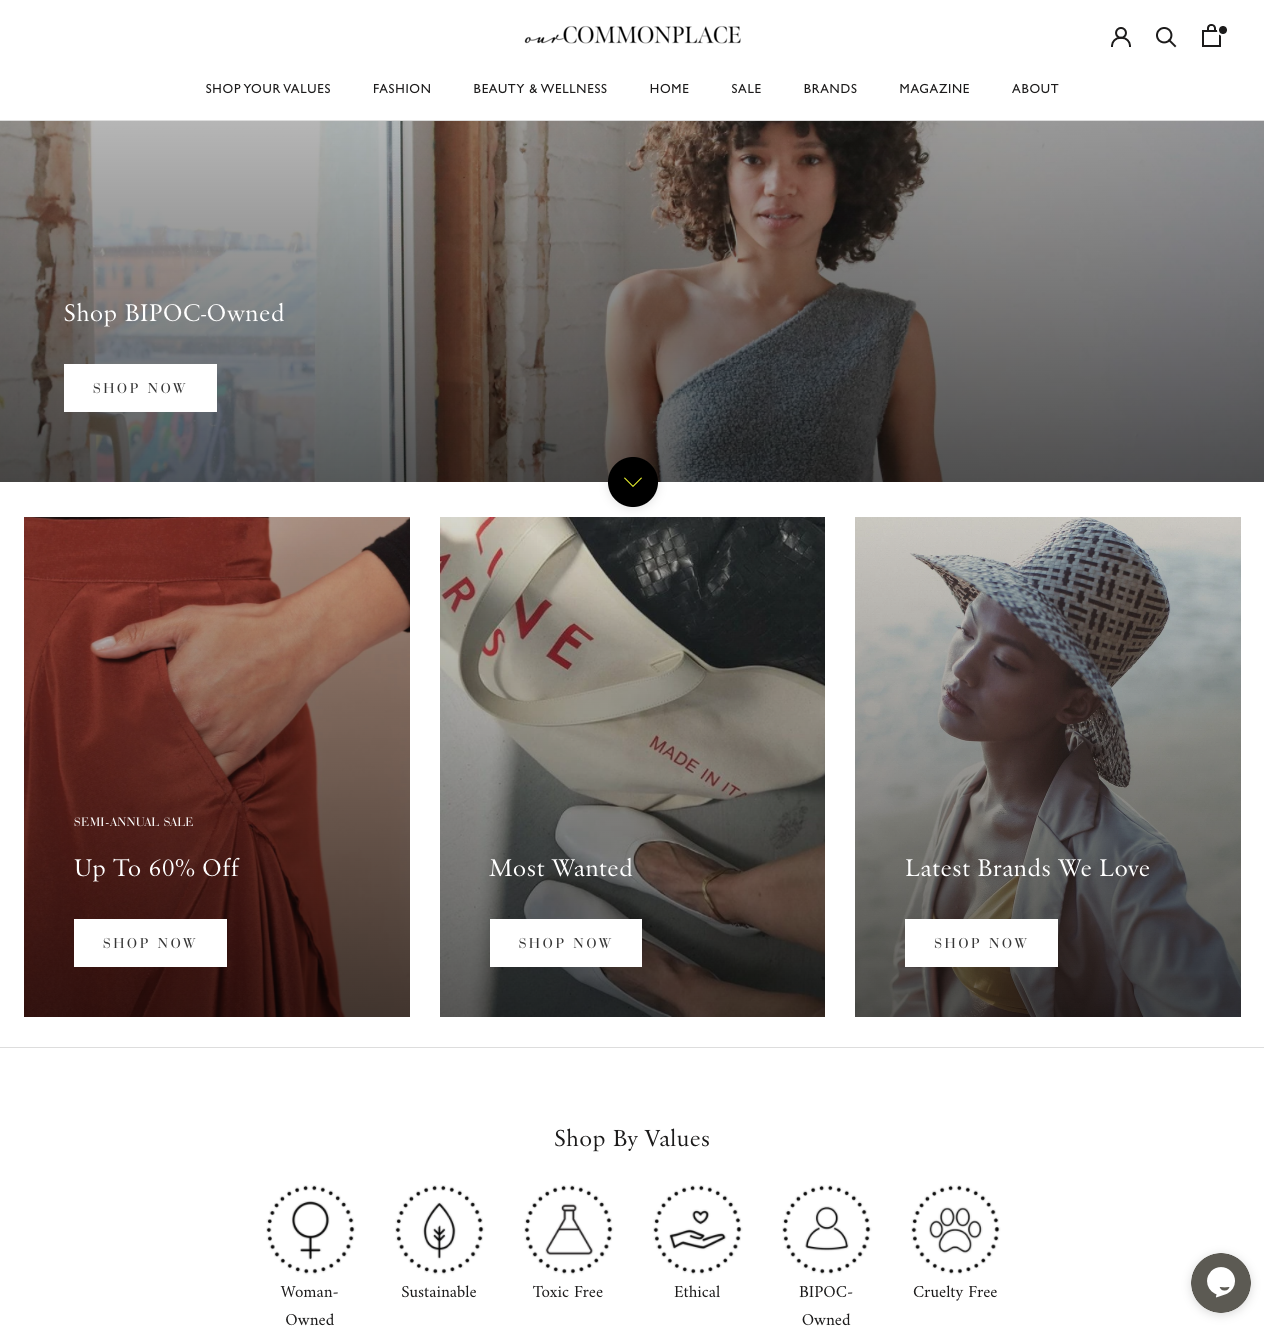 on-creating-an-online-social-goods-marketplace